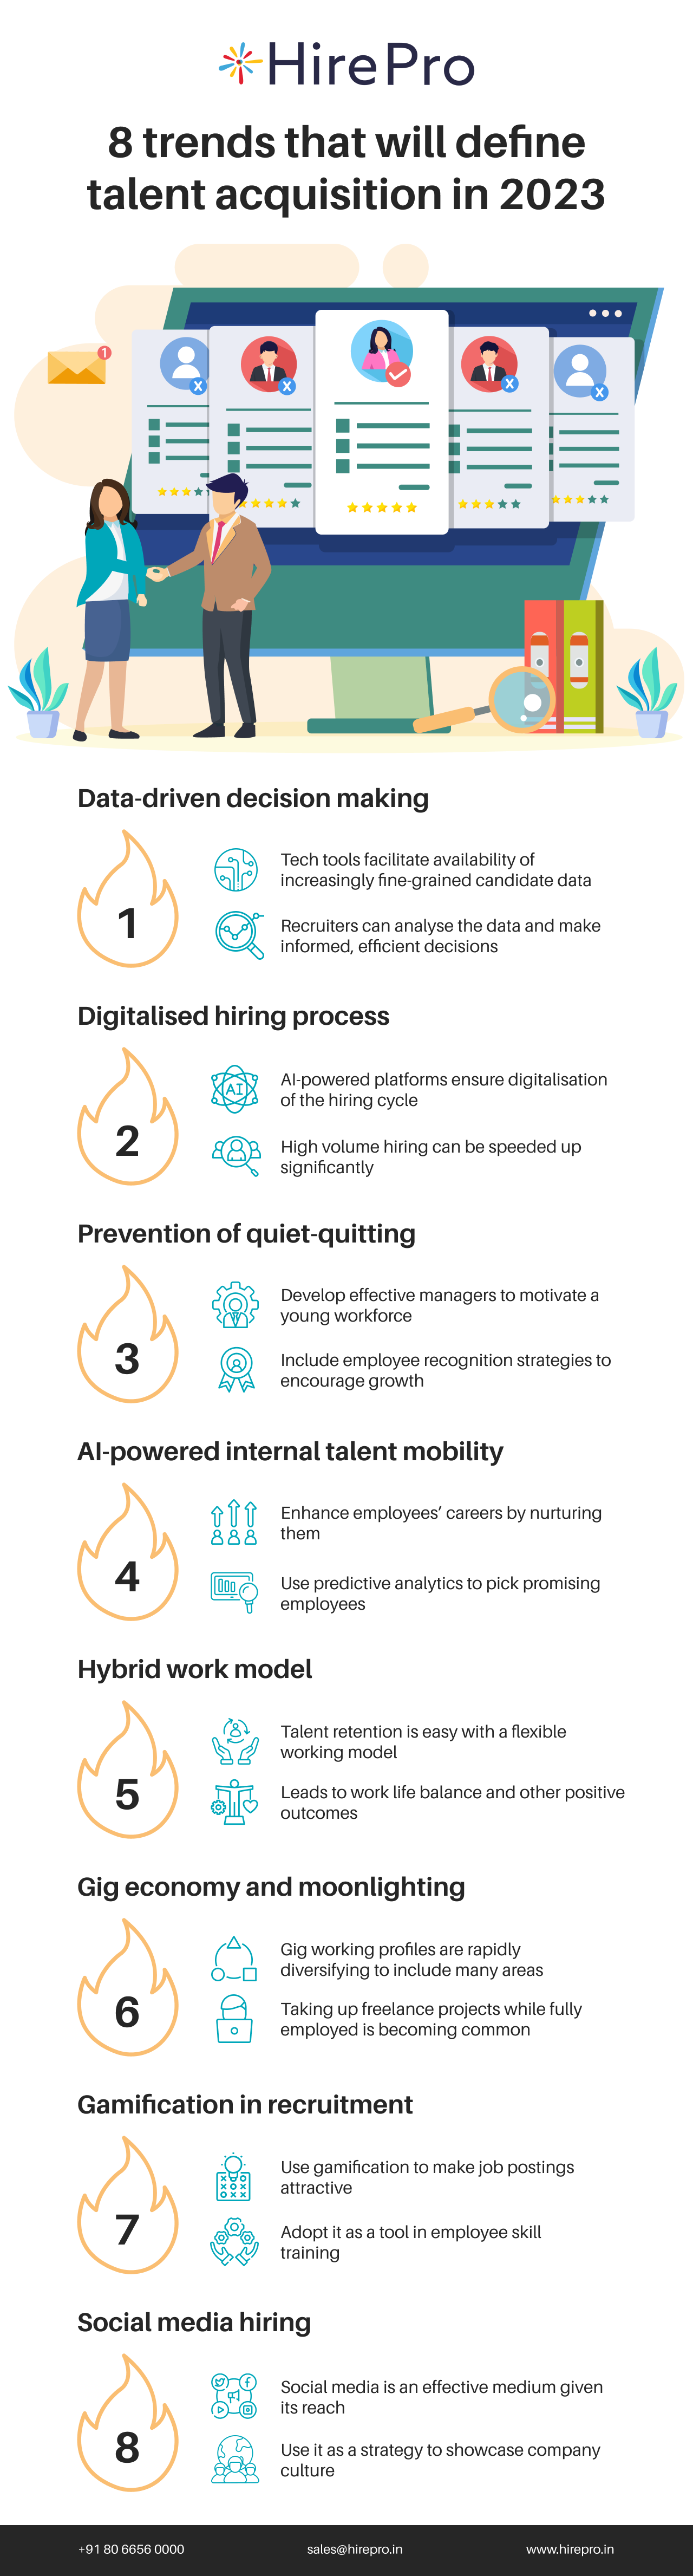 8 trends that will define talent acquisition in 2023